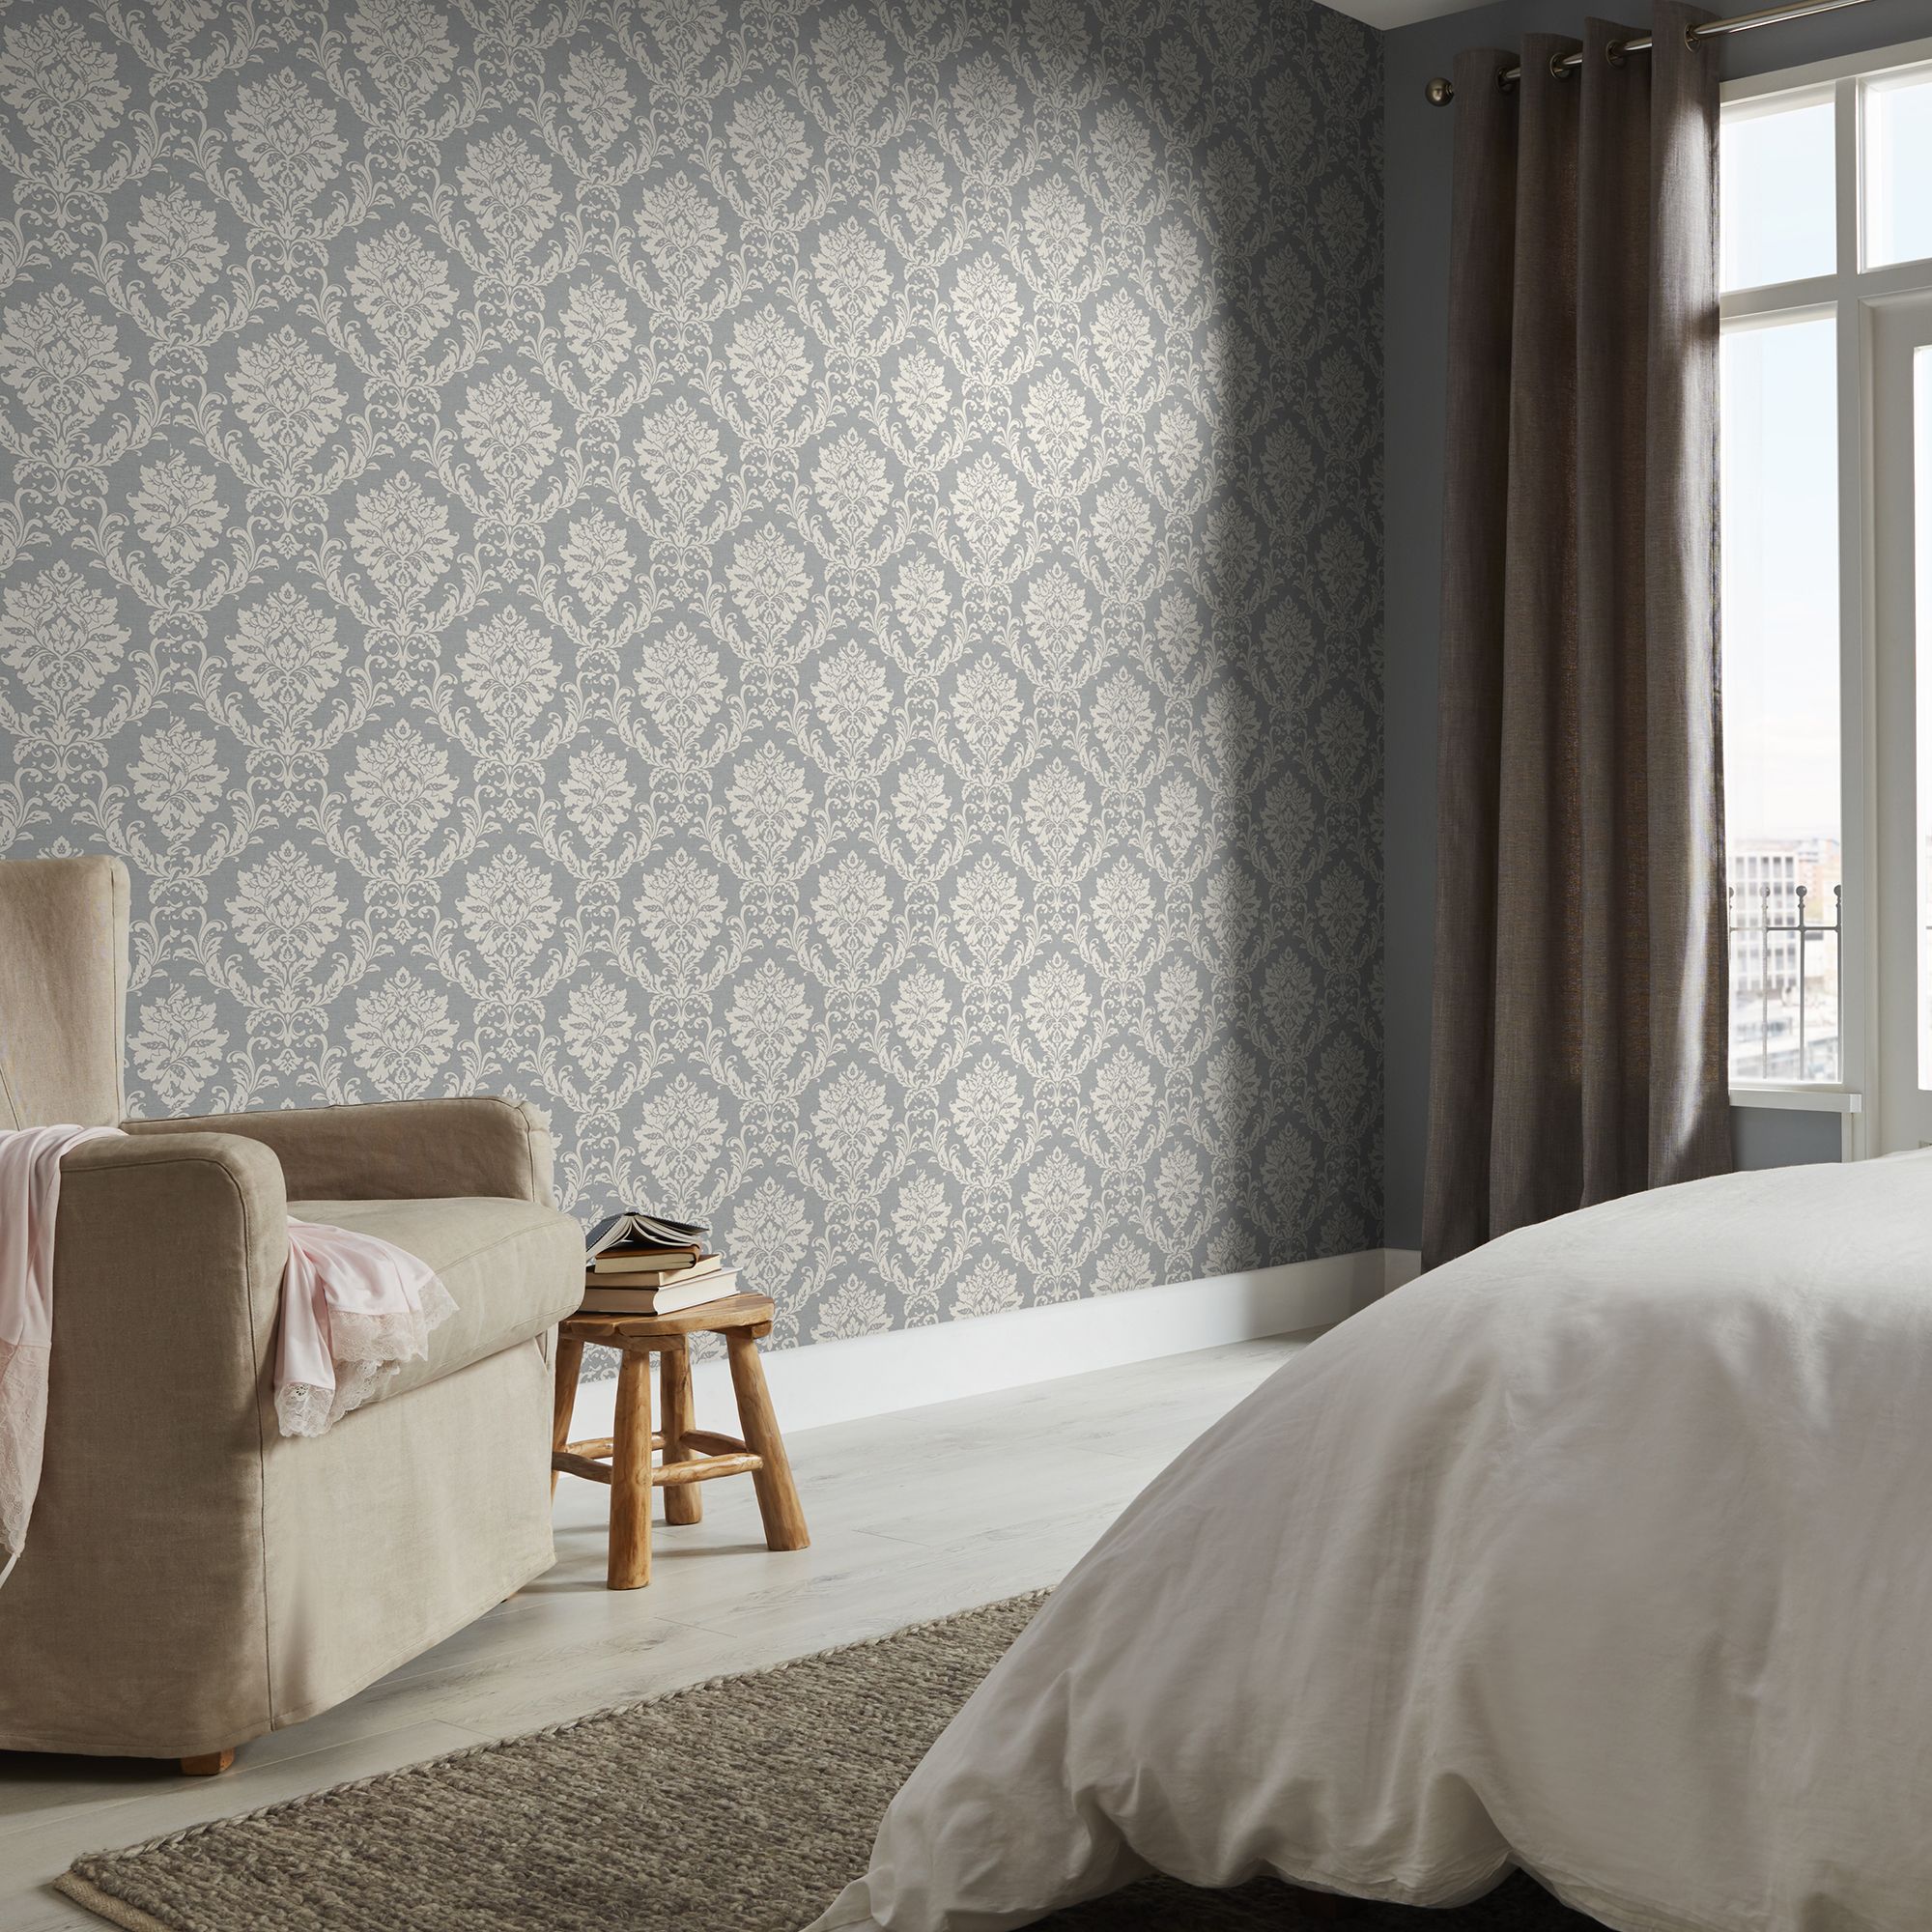 GoodHome Mire Grey Woven effect Damask Textured Wallpaper Sample